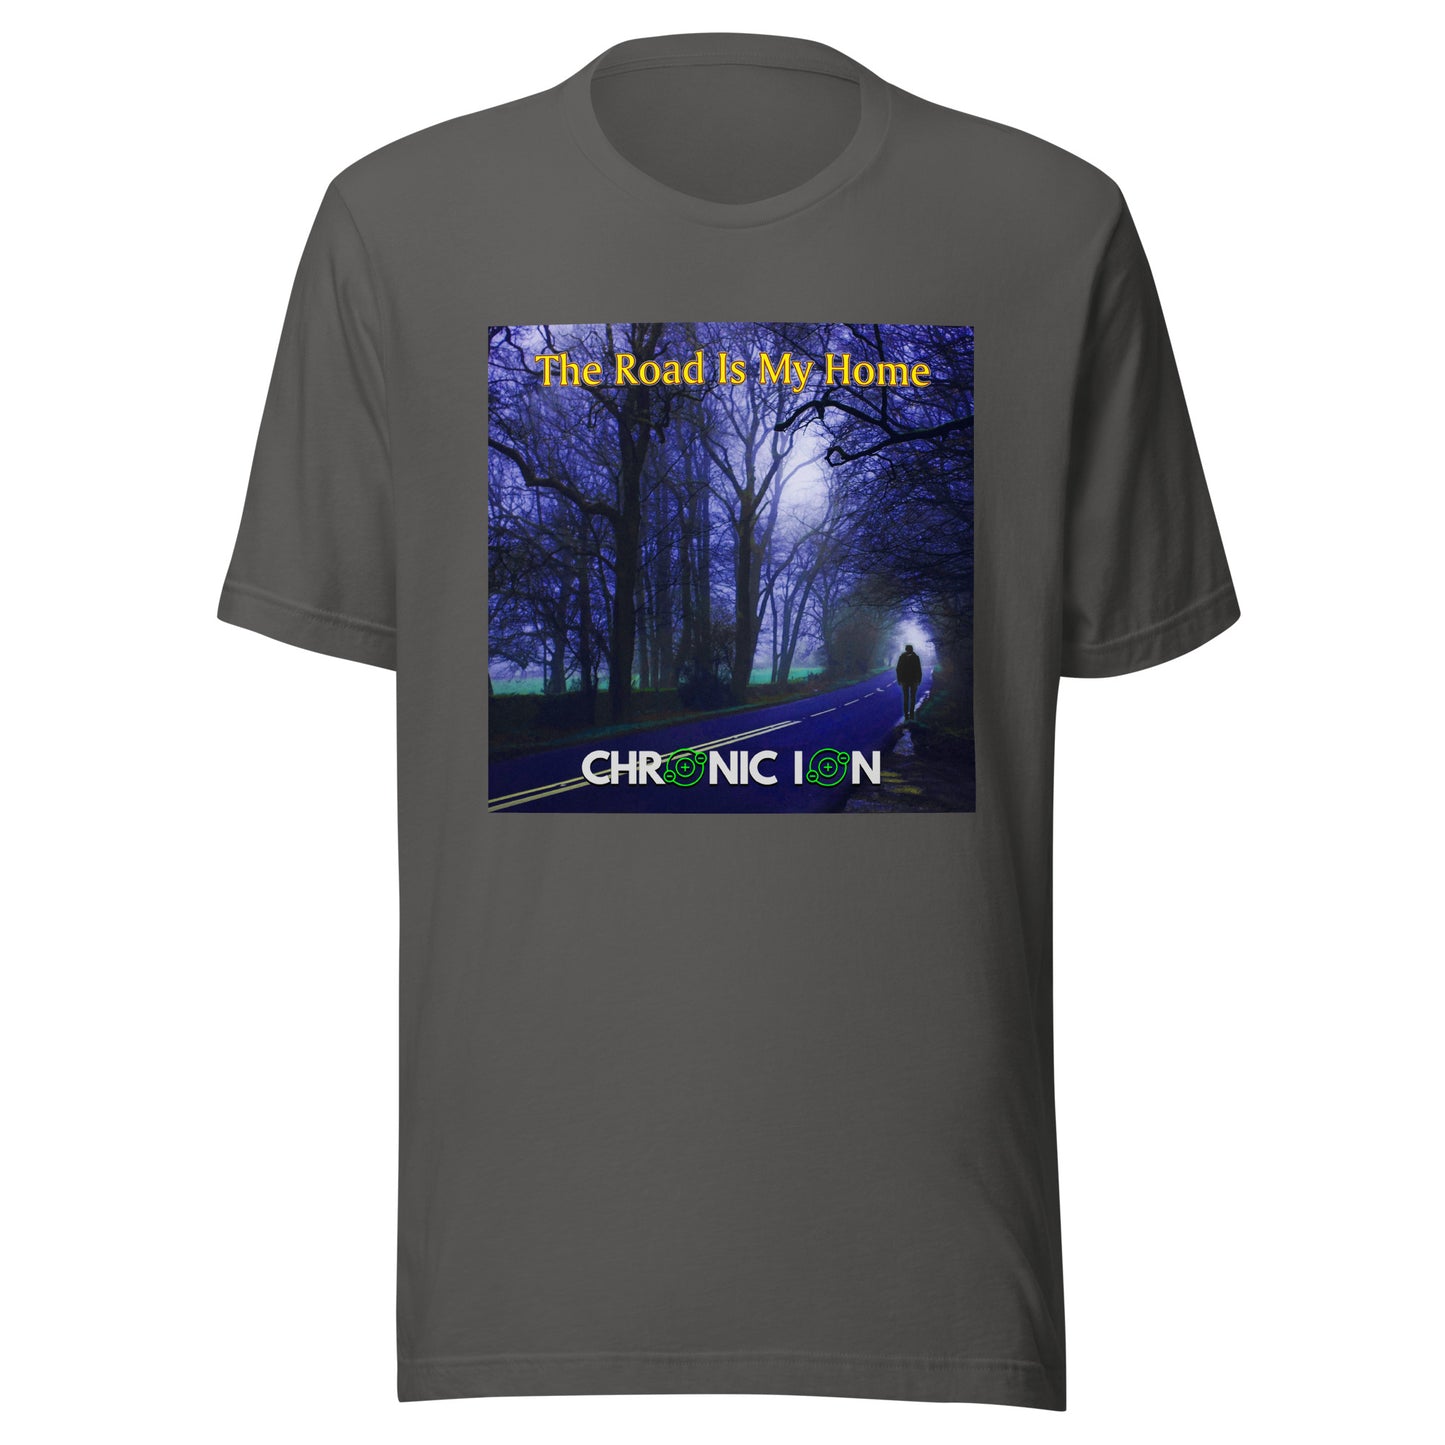 Chronic Ion - The Road Is My Home T-Shirt